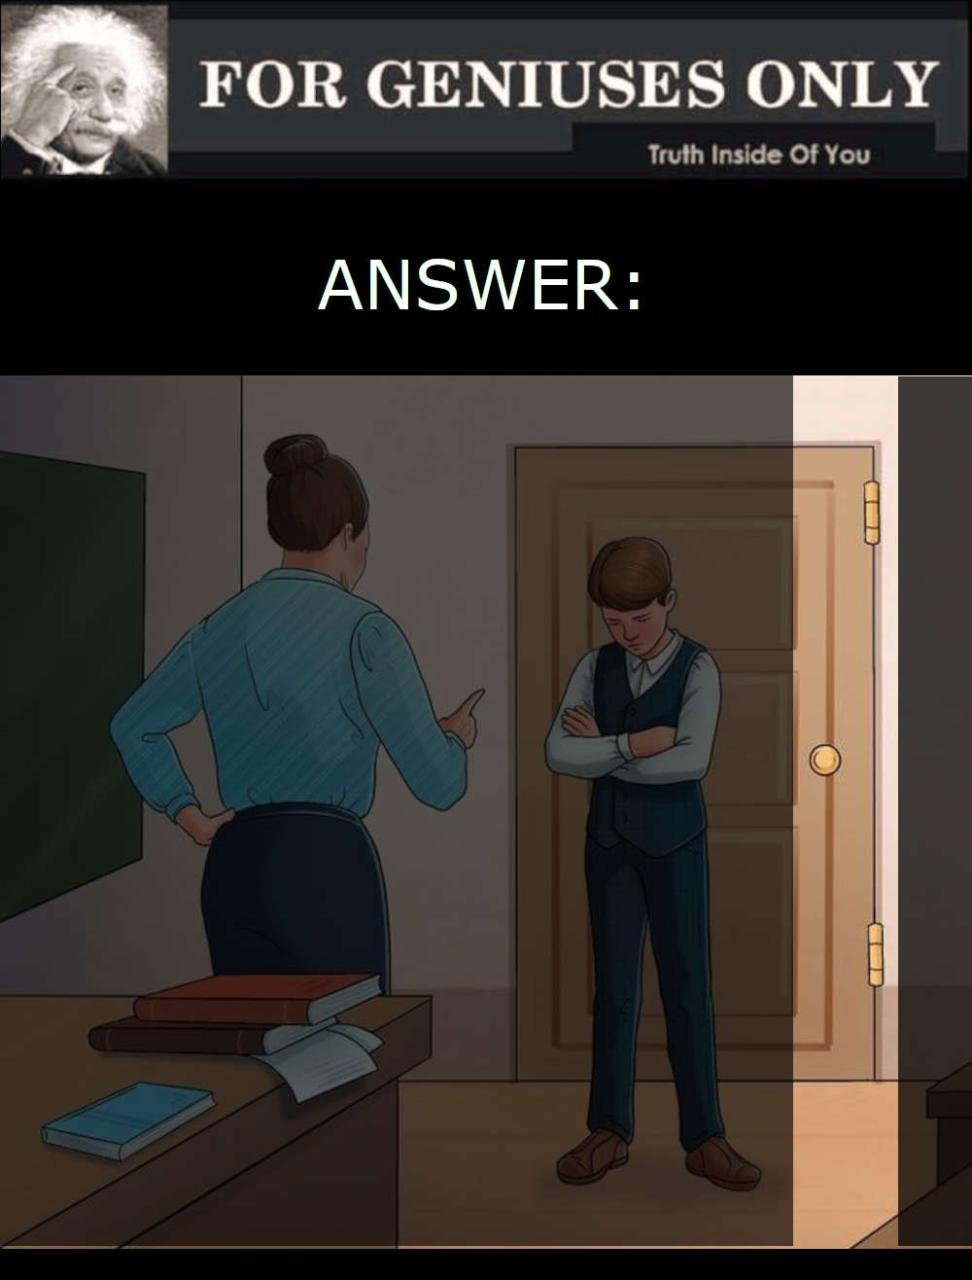 What is not right in the picture answer